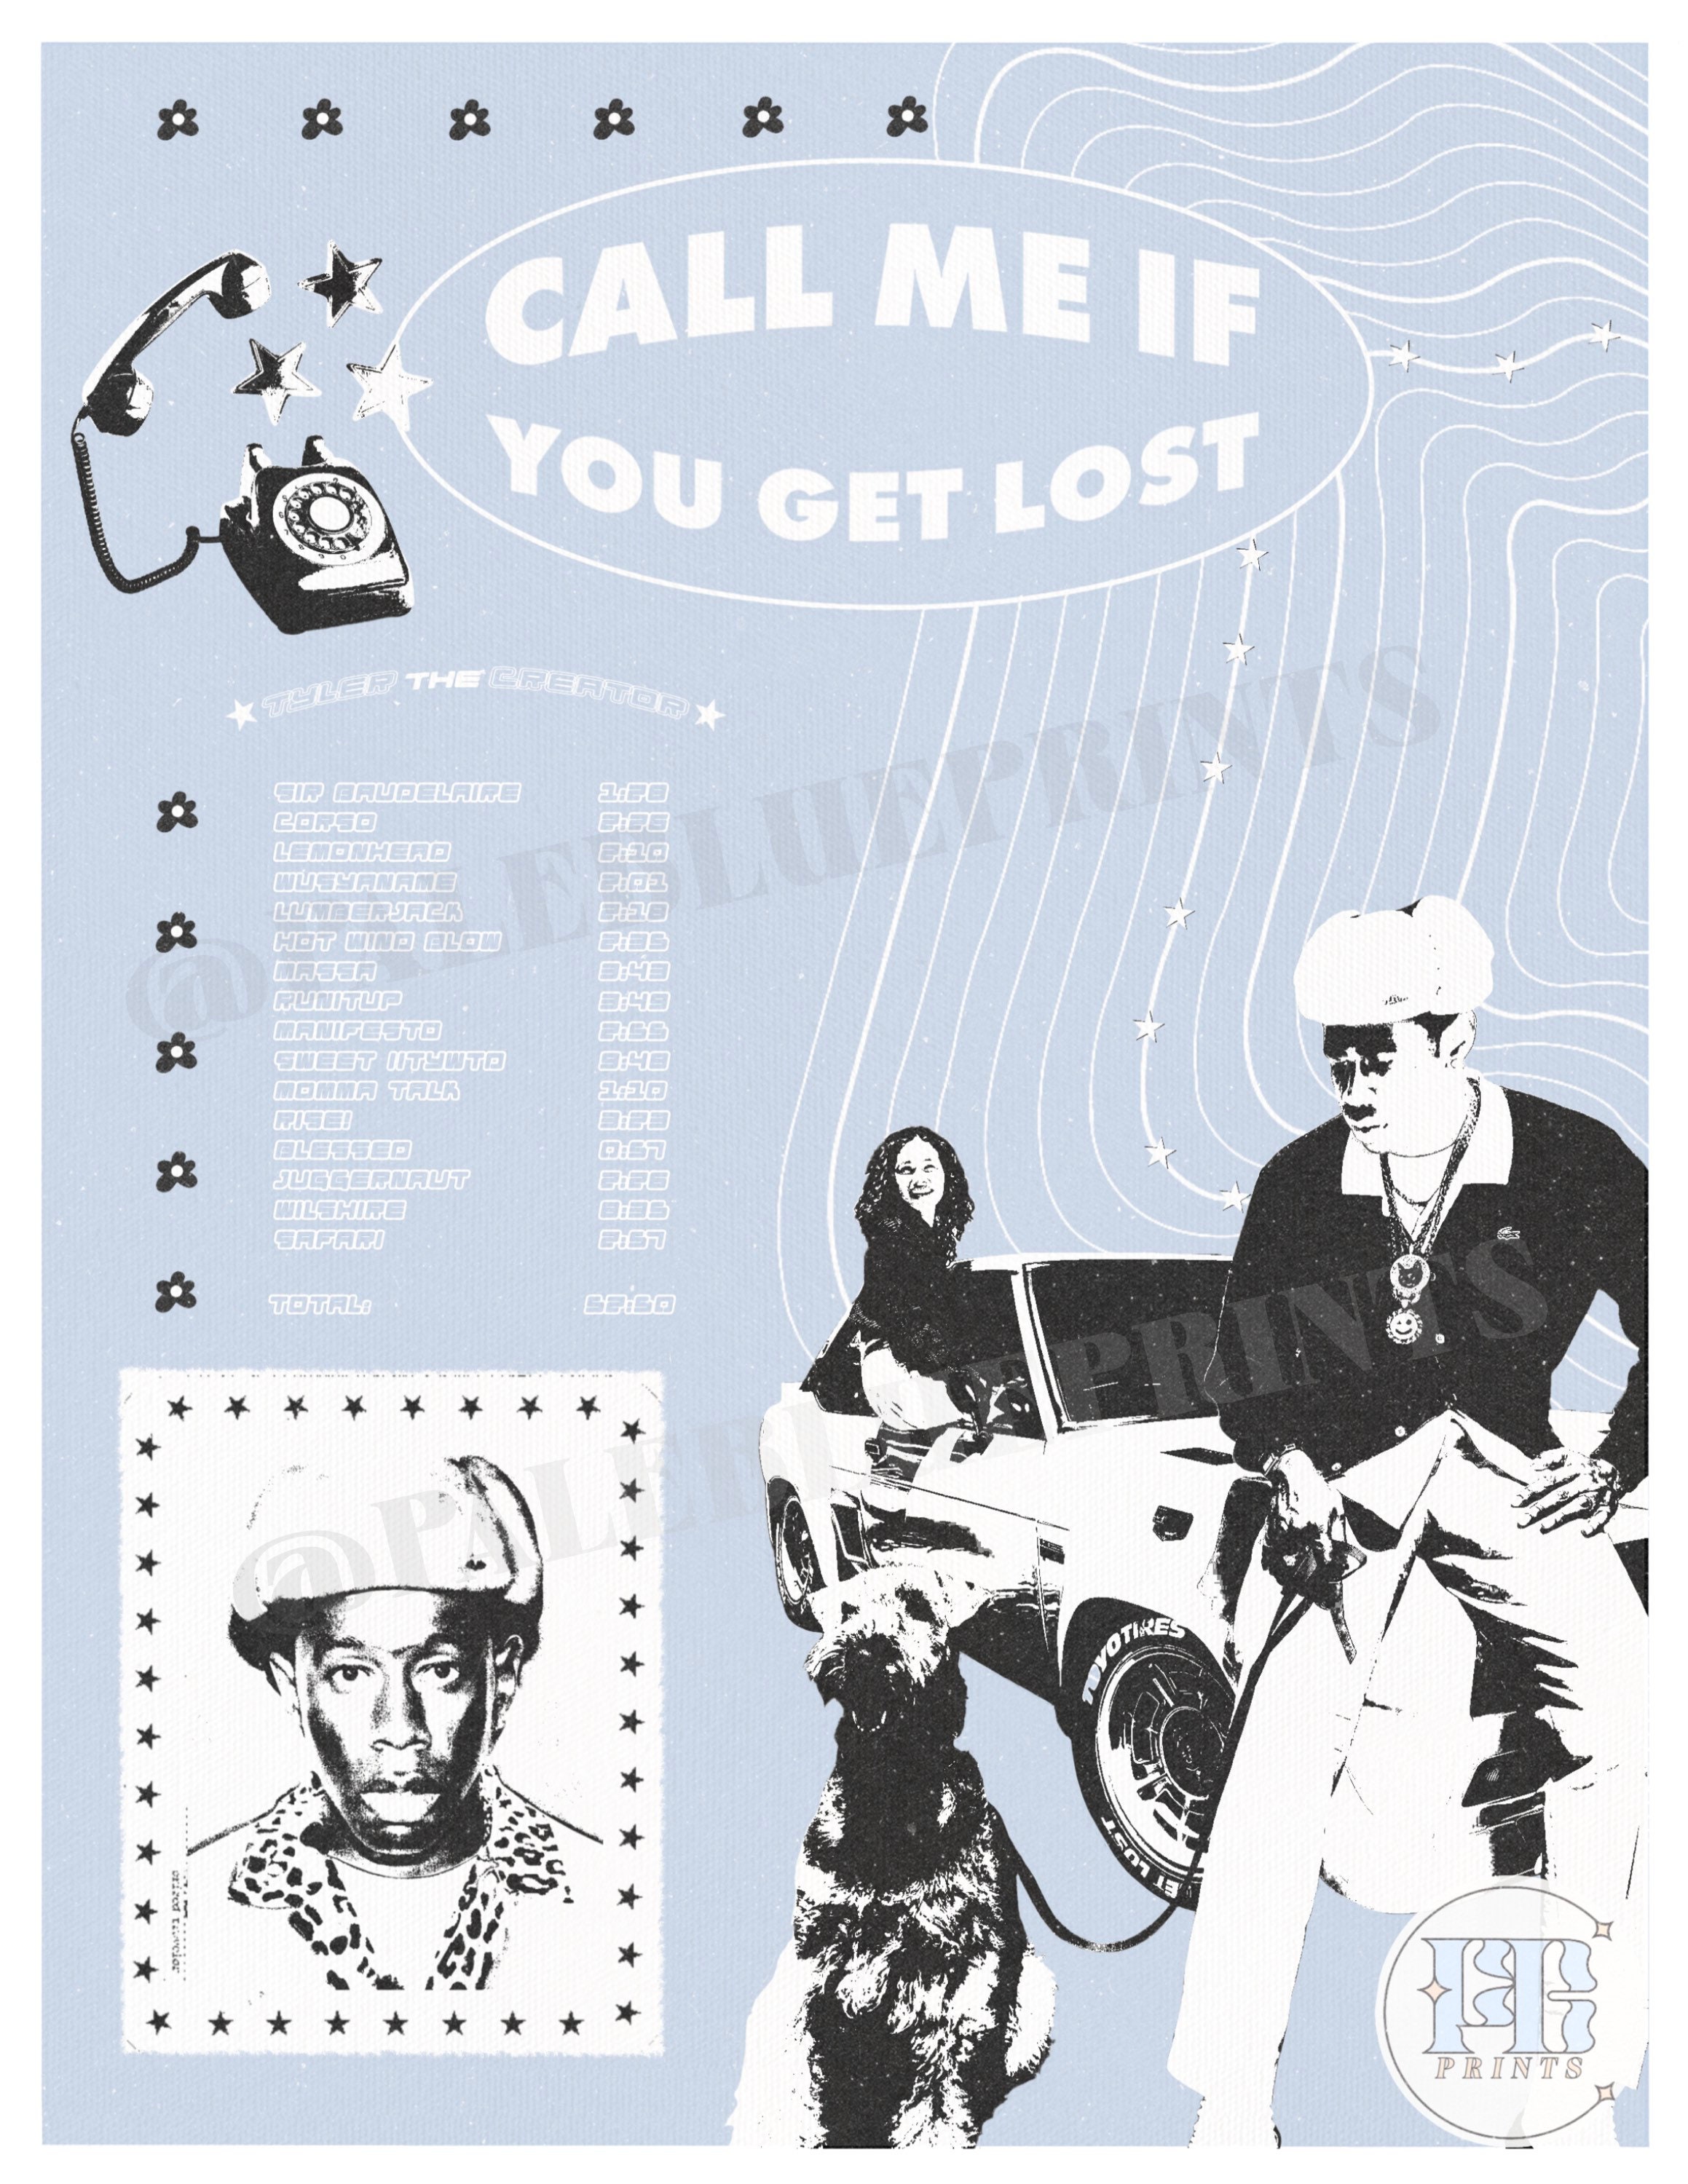 Call me if you get lost, retro style poster print